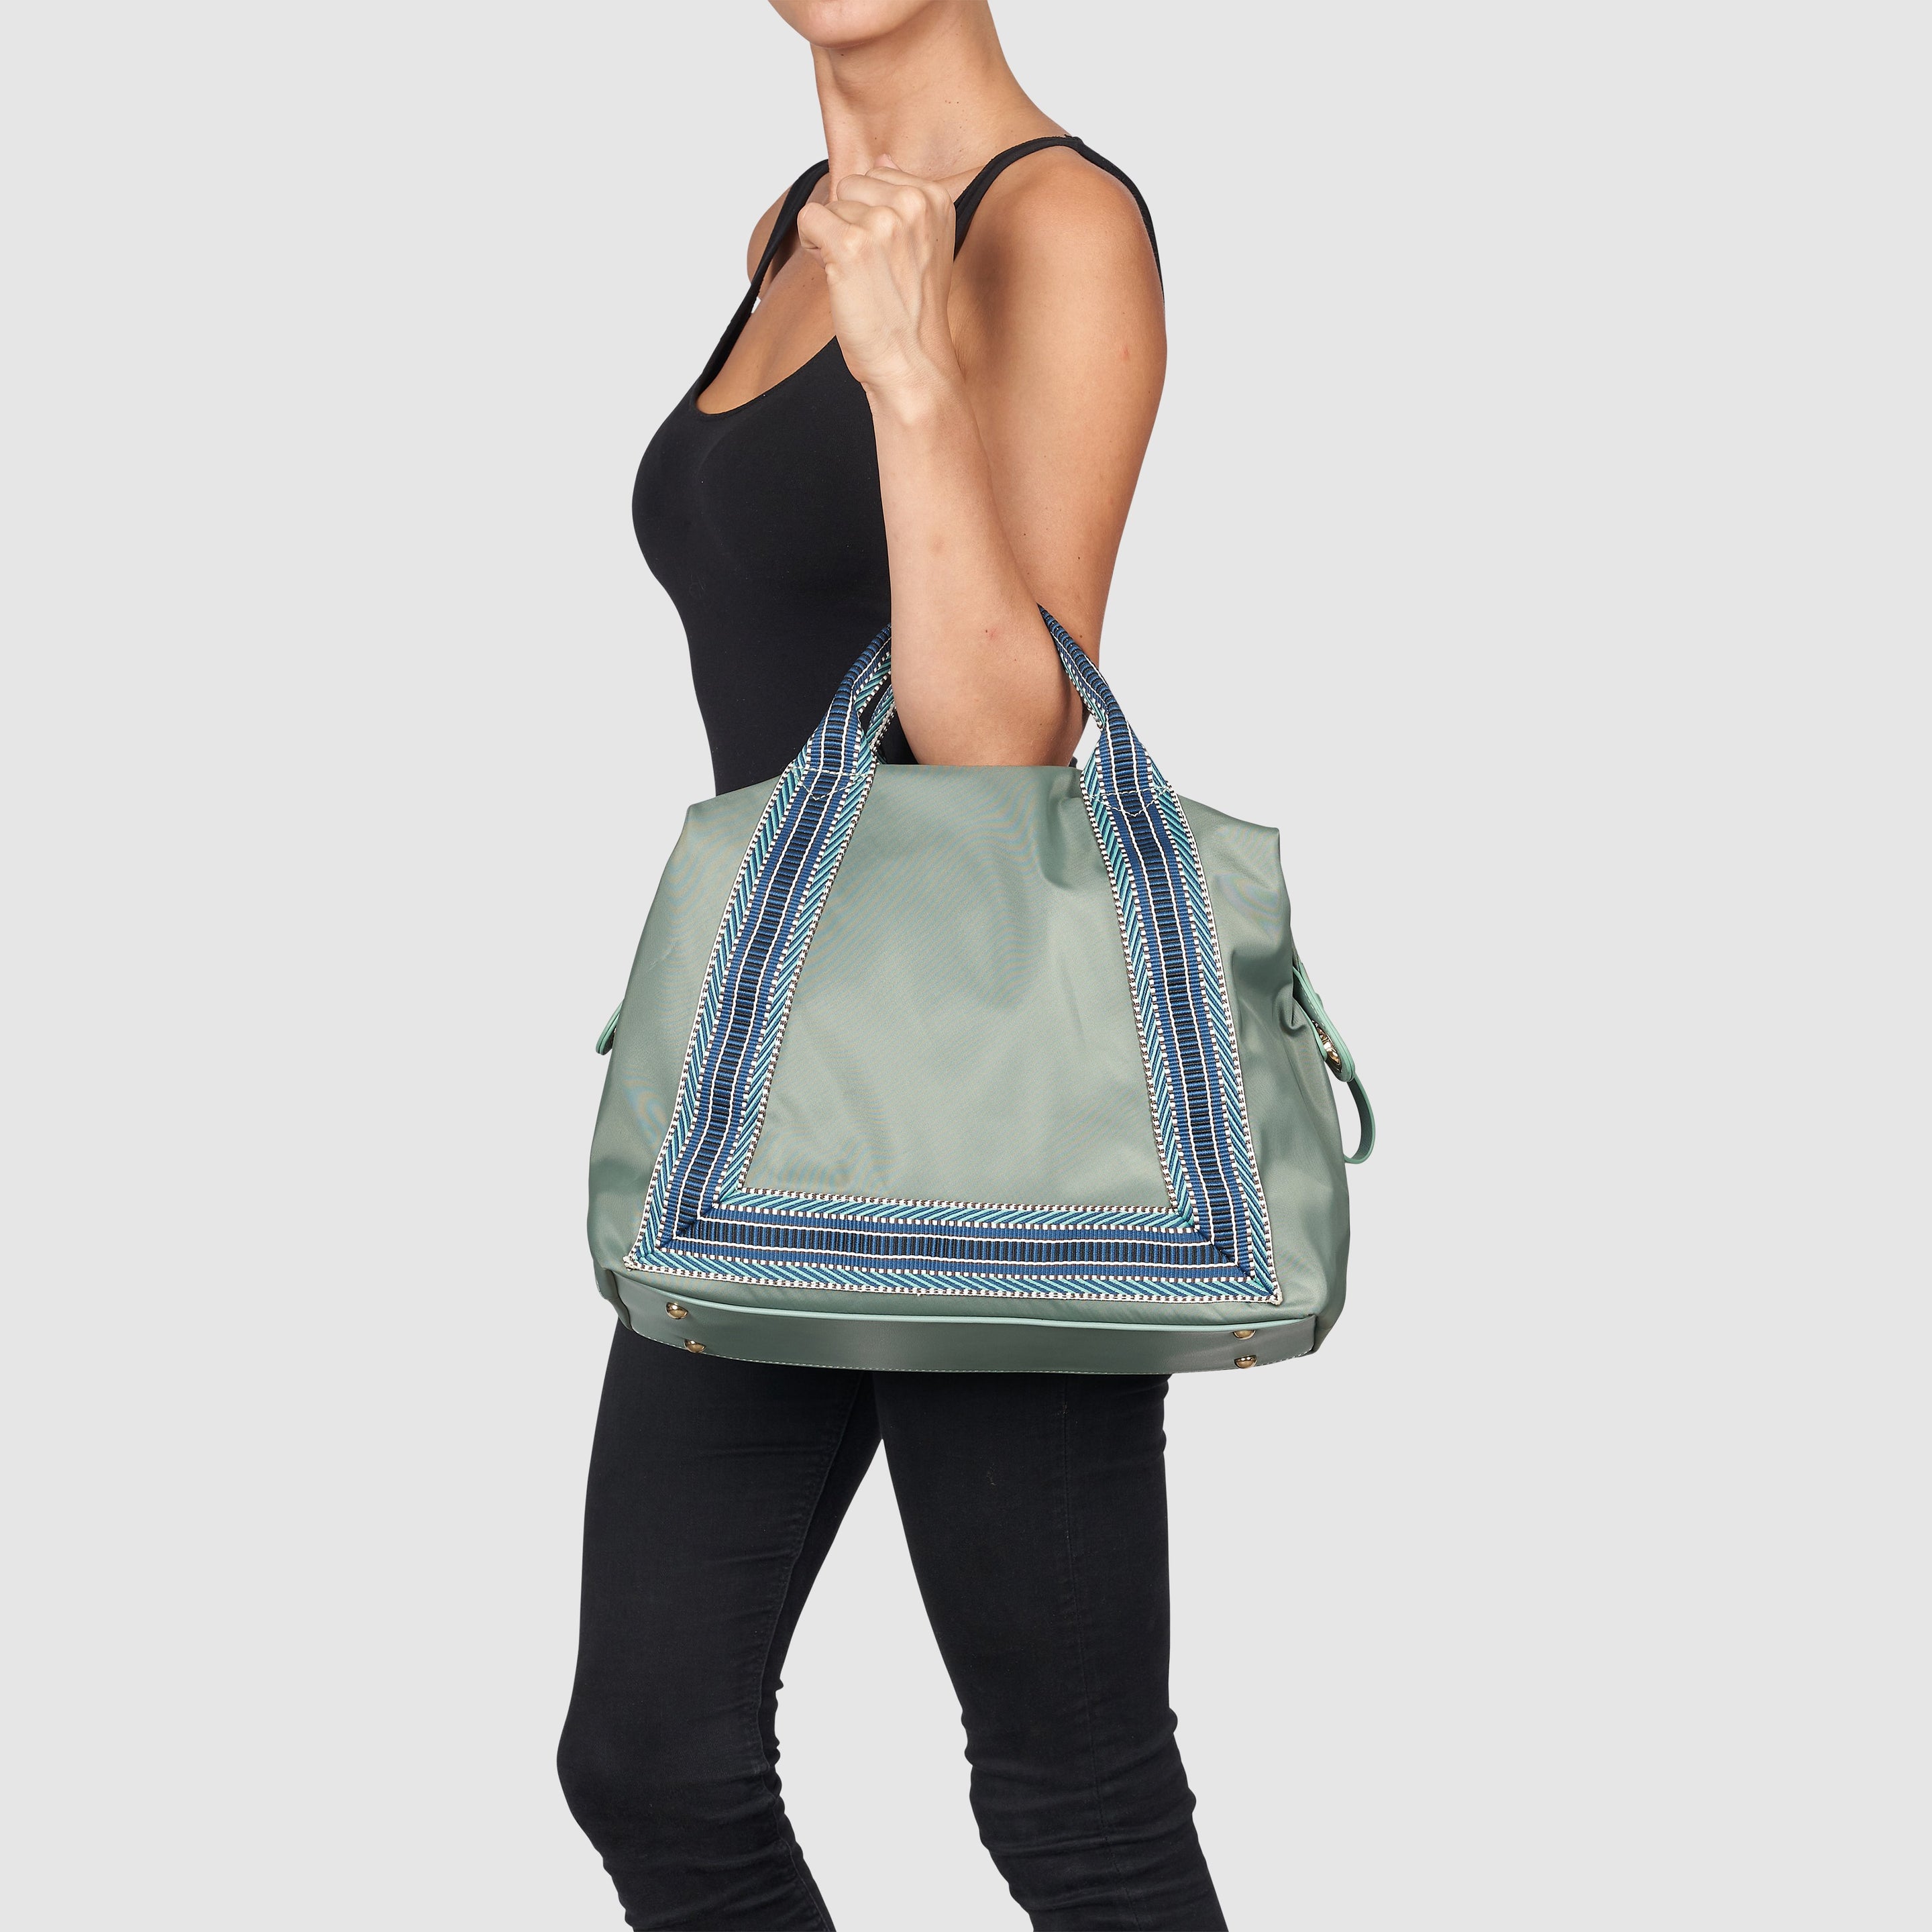 Load image into Gallery viewer, Supreme Vegan Tote by Urban Originals - Olive
